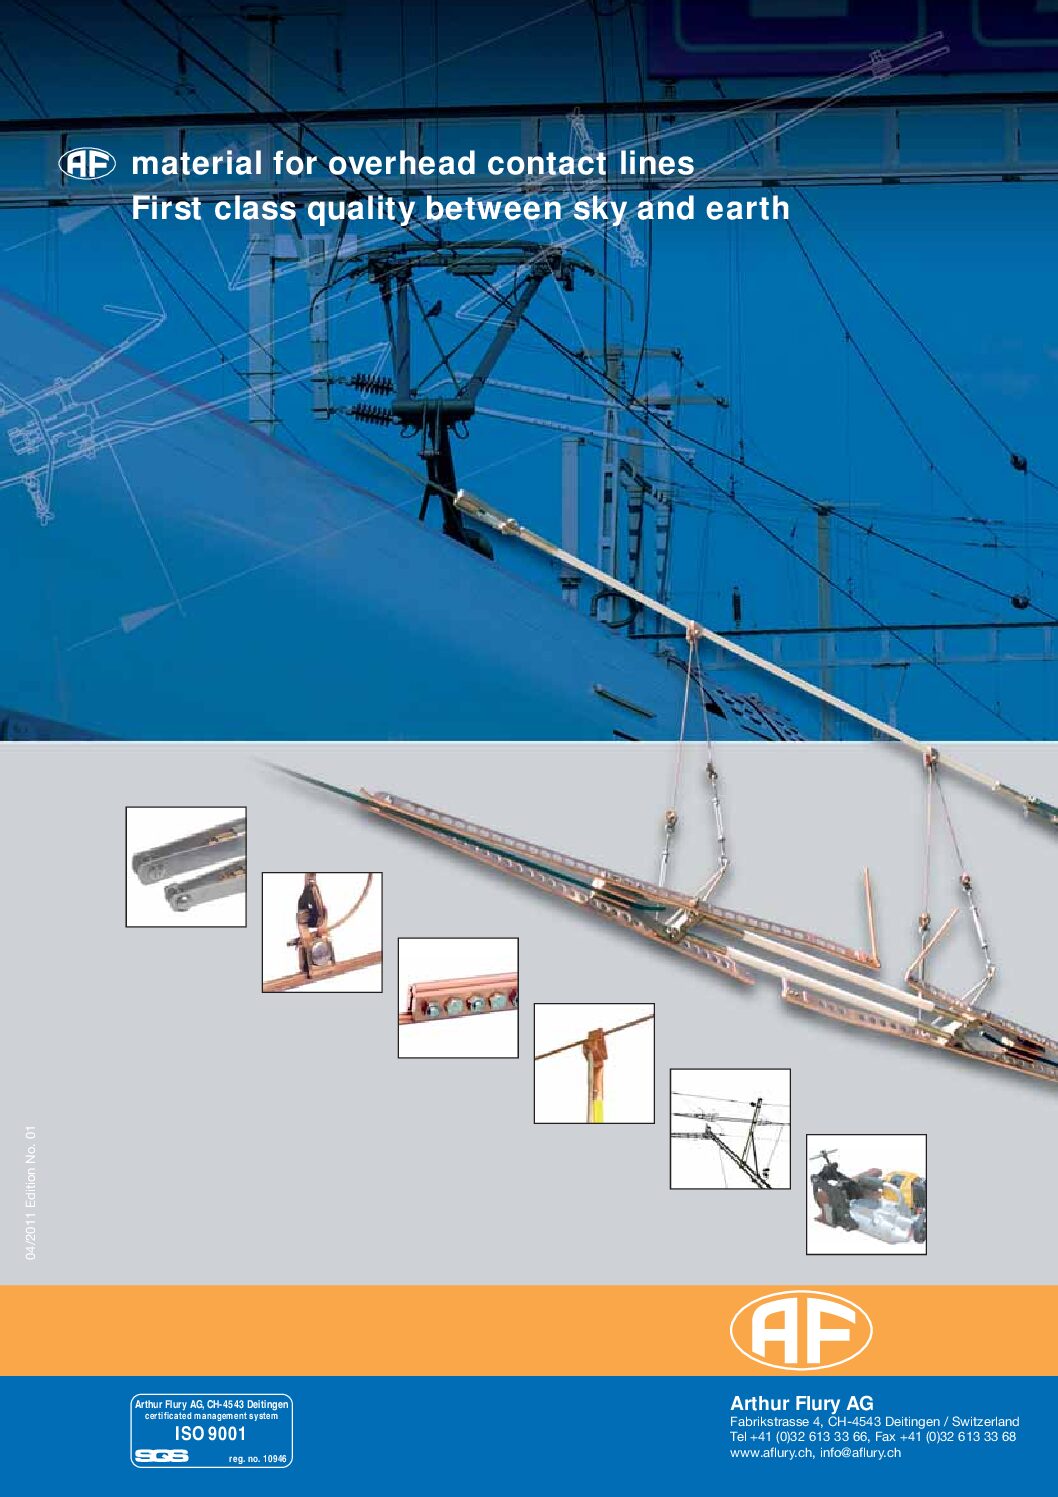 Material for Overhead Power Lines